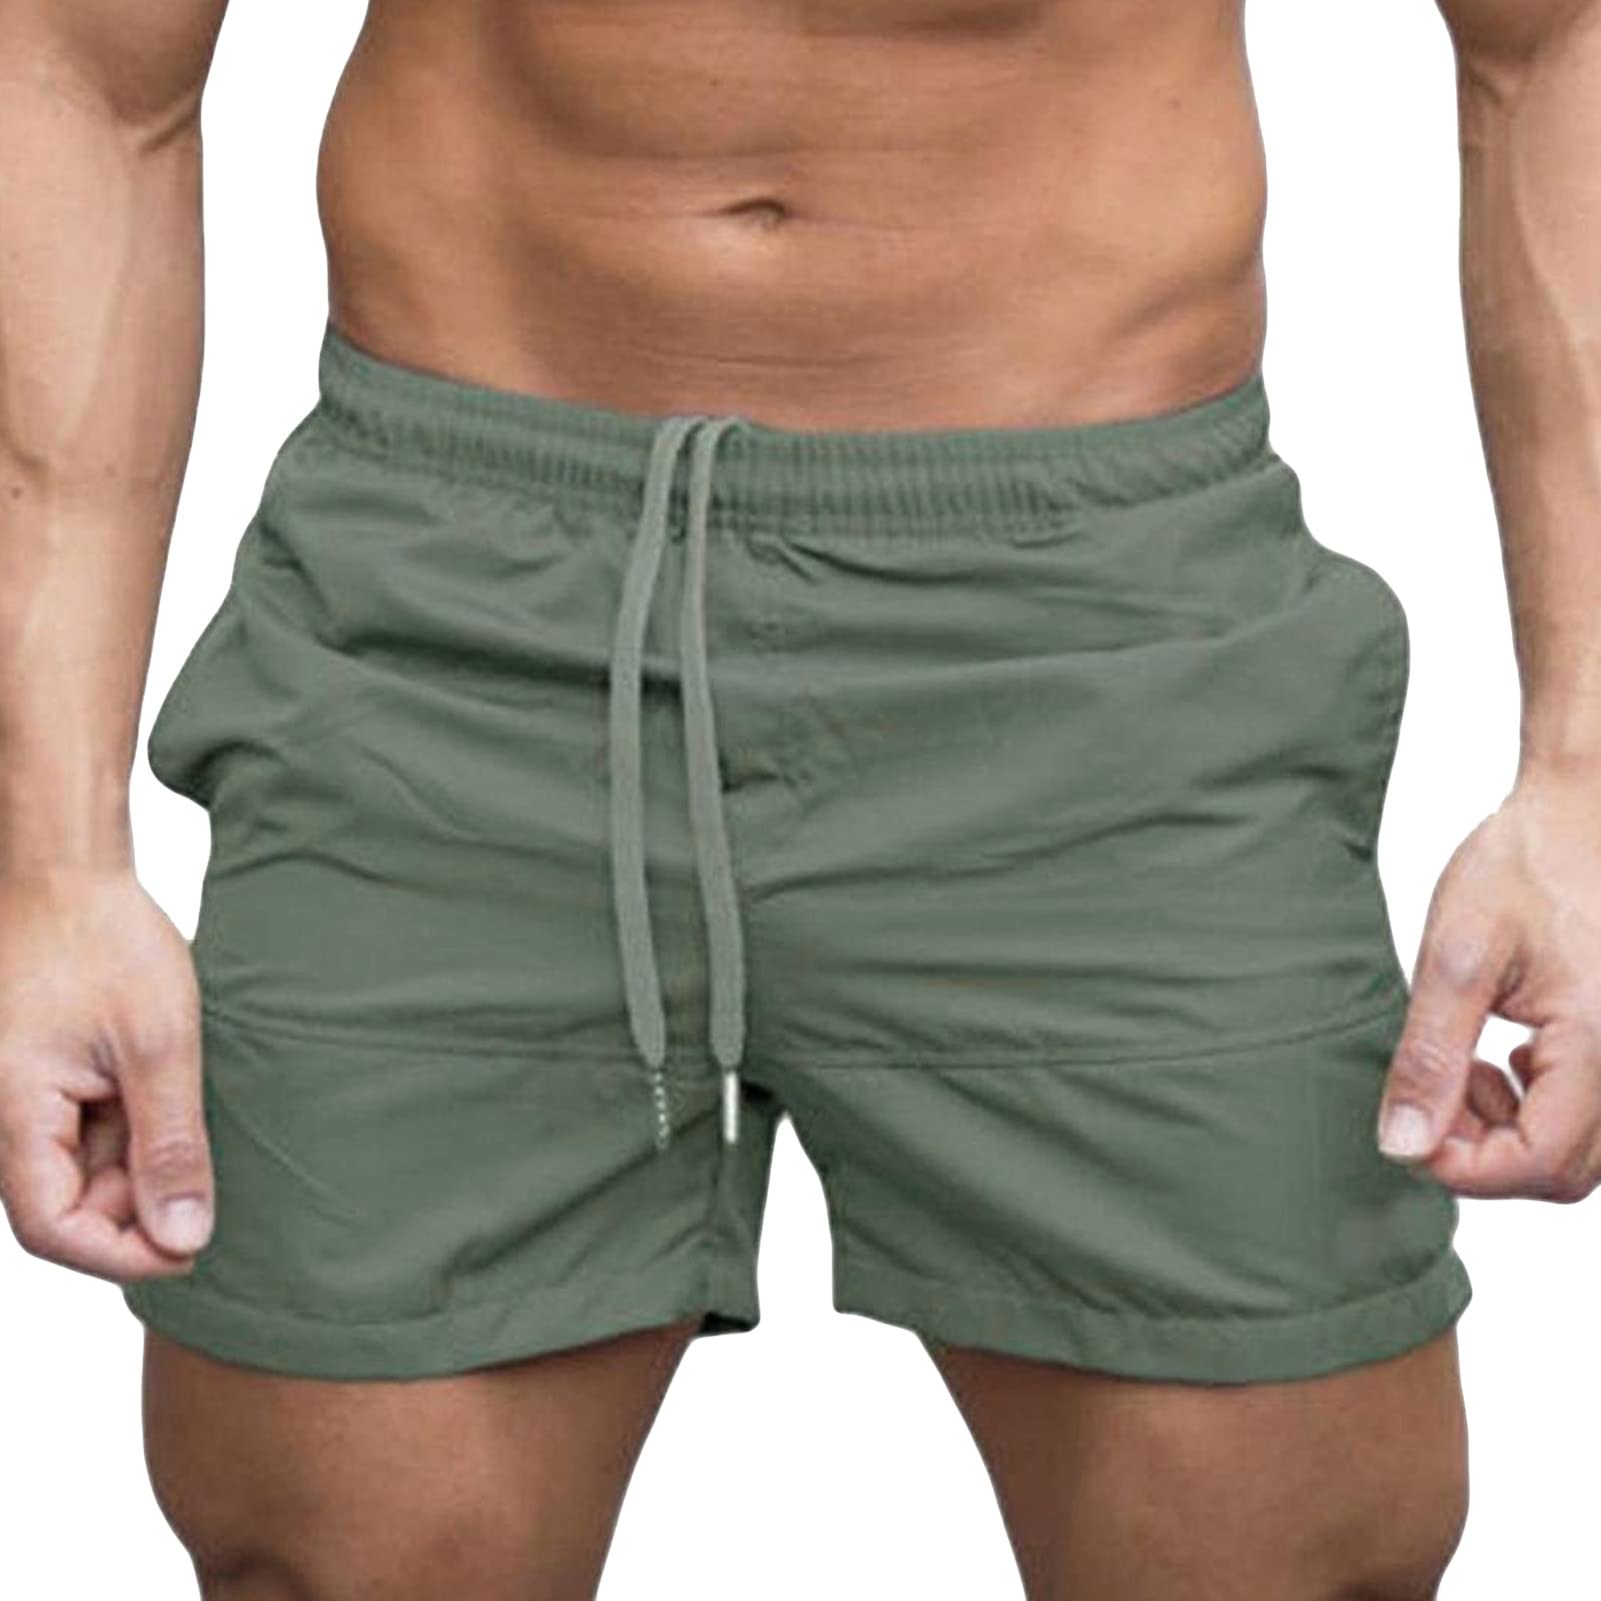 Men's Workout Sports Shorts Quick Dry Lightweight Running Gym Shorts Casual Summer Beach Swim Trunks with Pockets